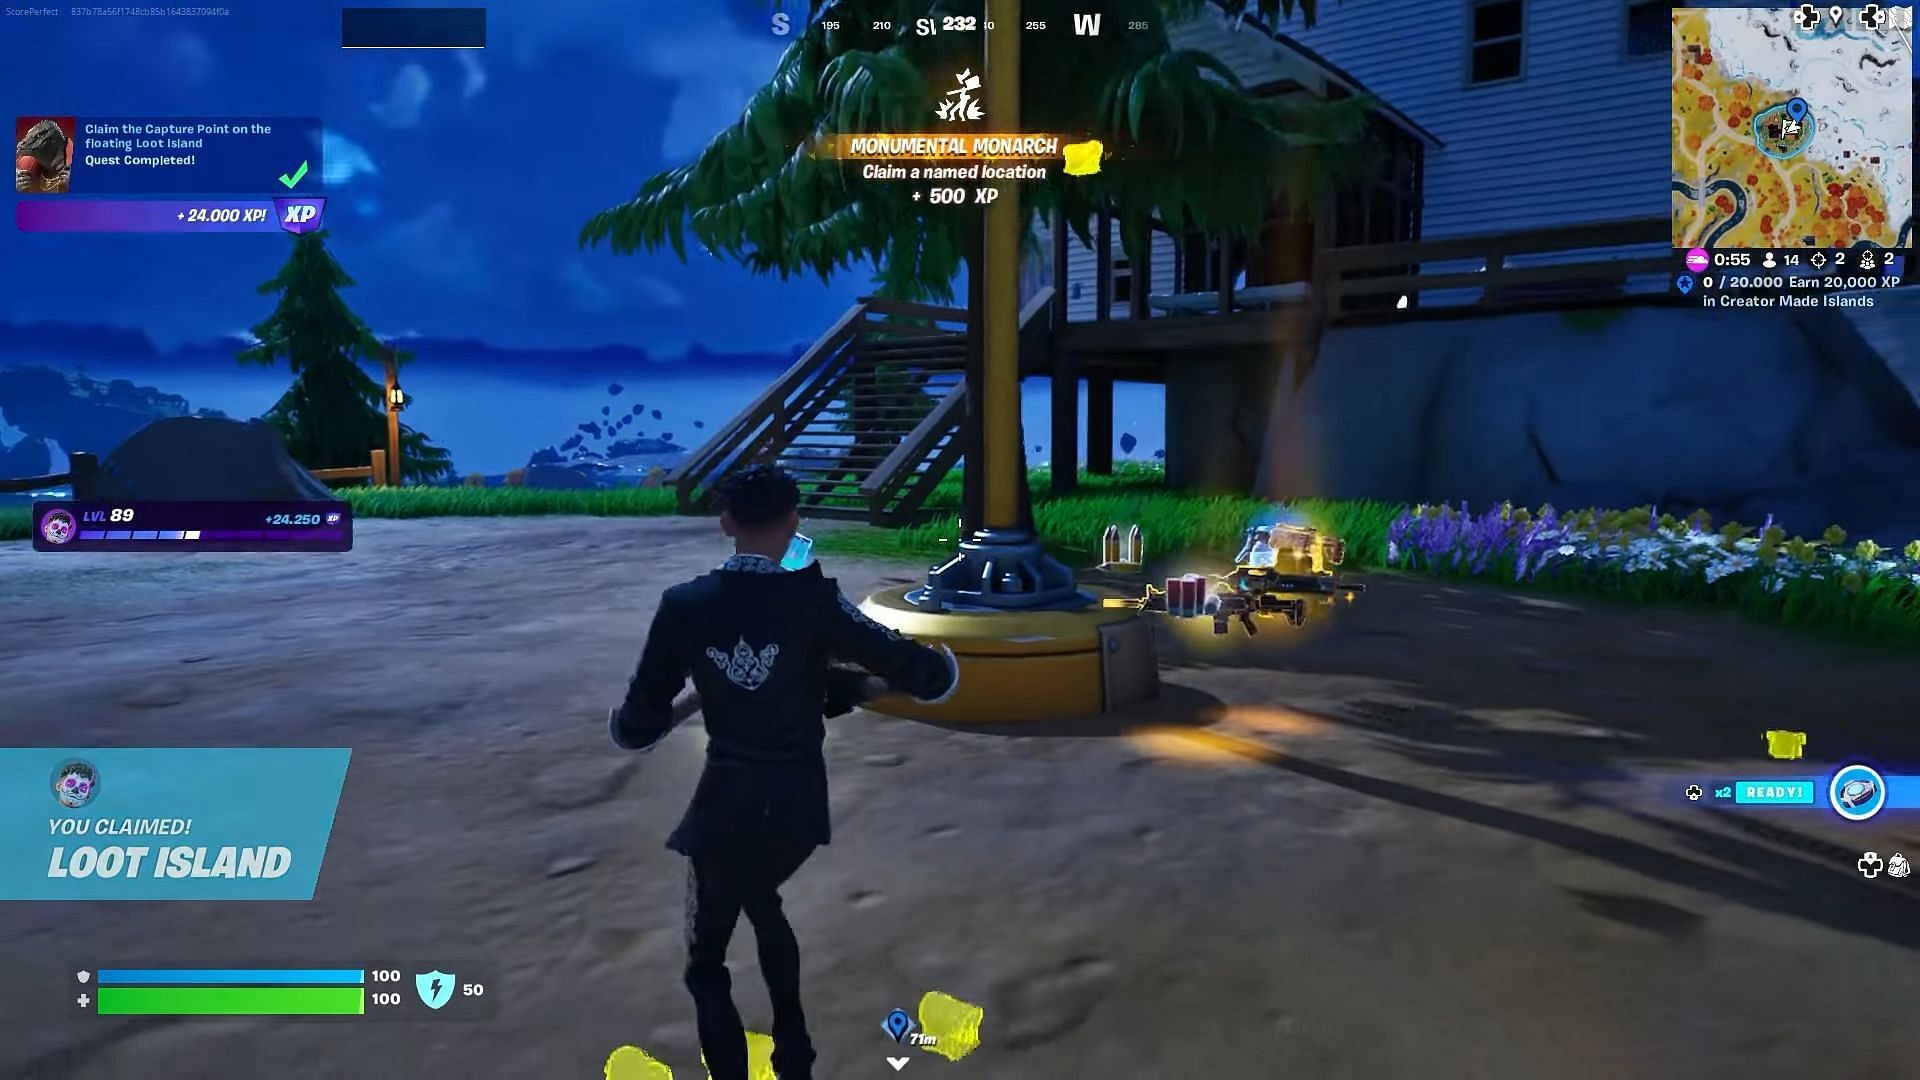 claim the Capture point on the floating loot island